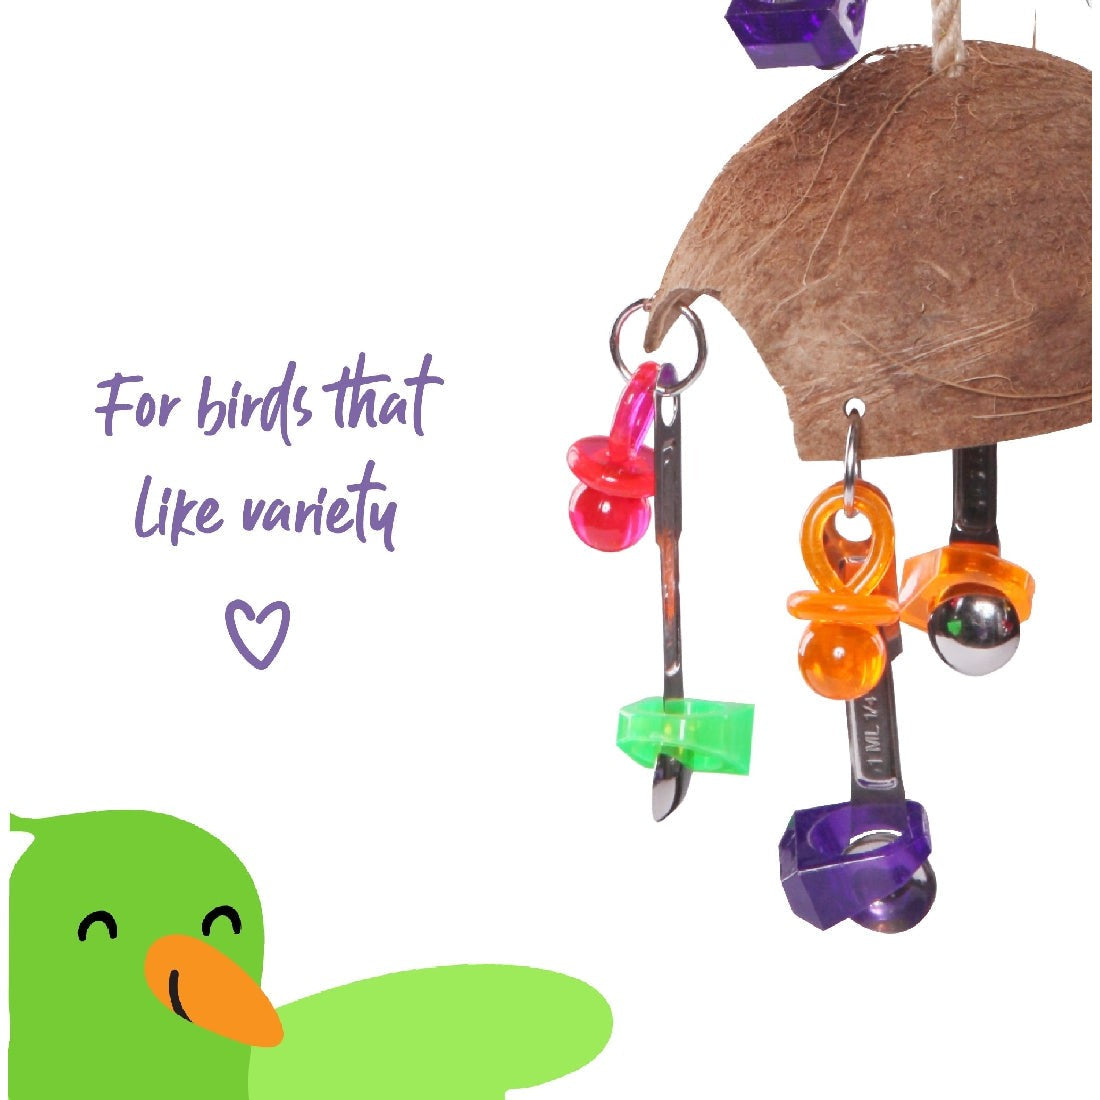 Colorful bird toy with various beads and a coconut shell.